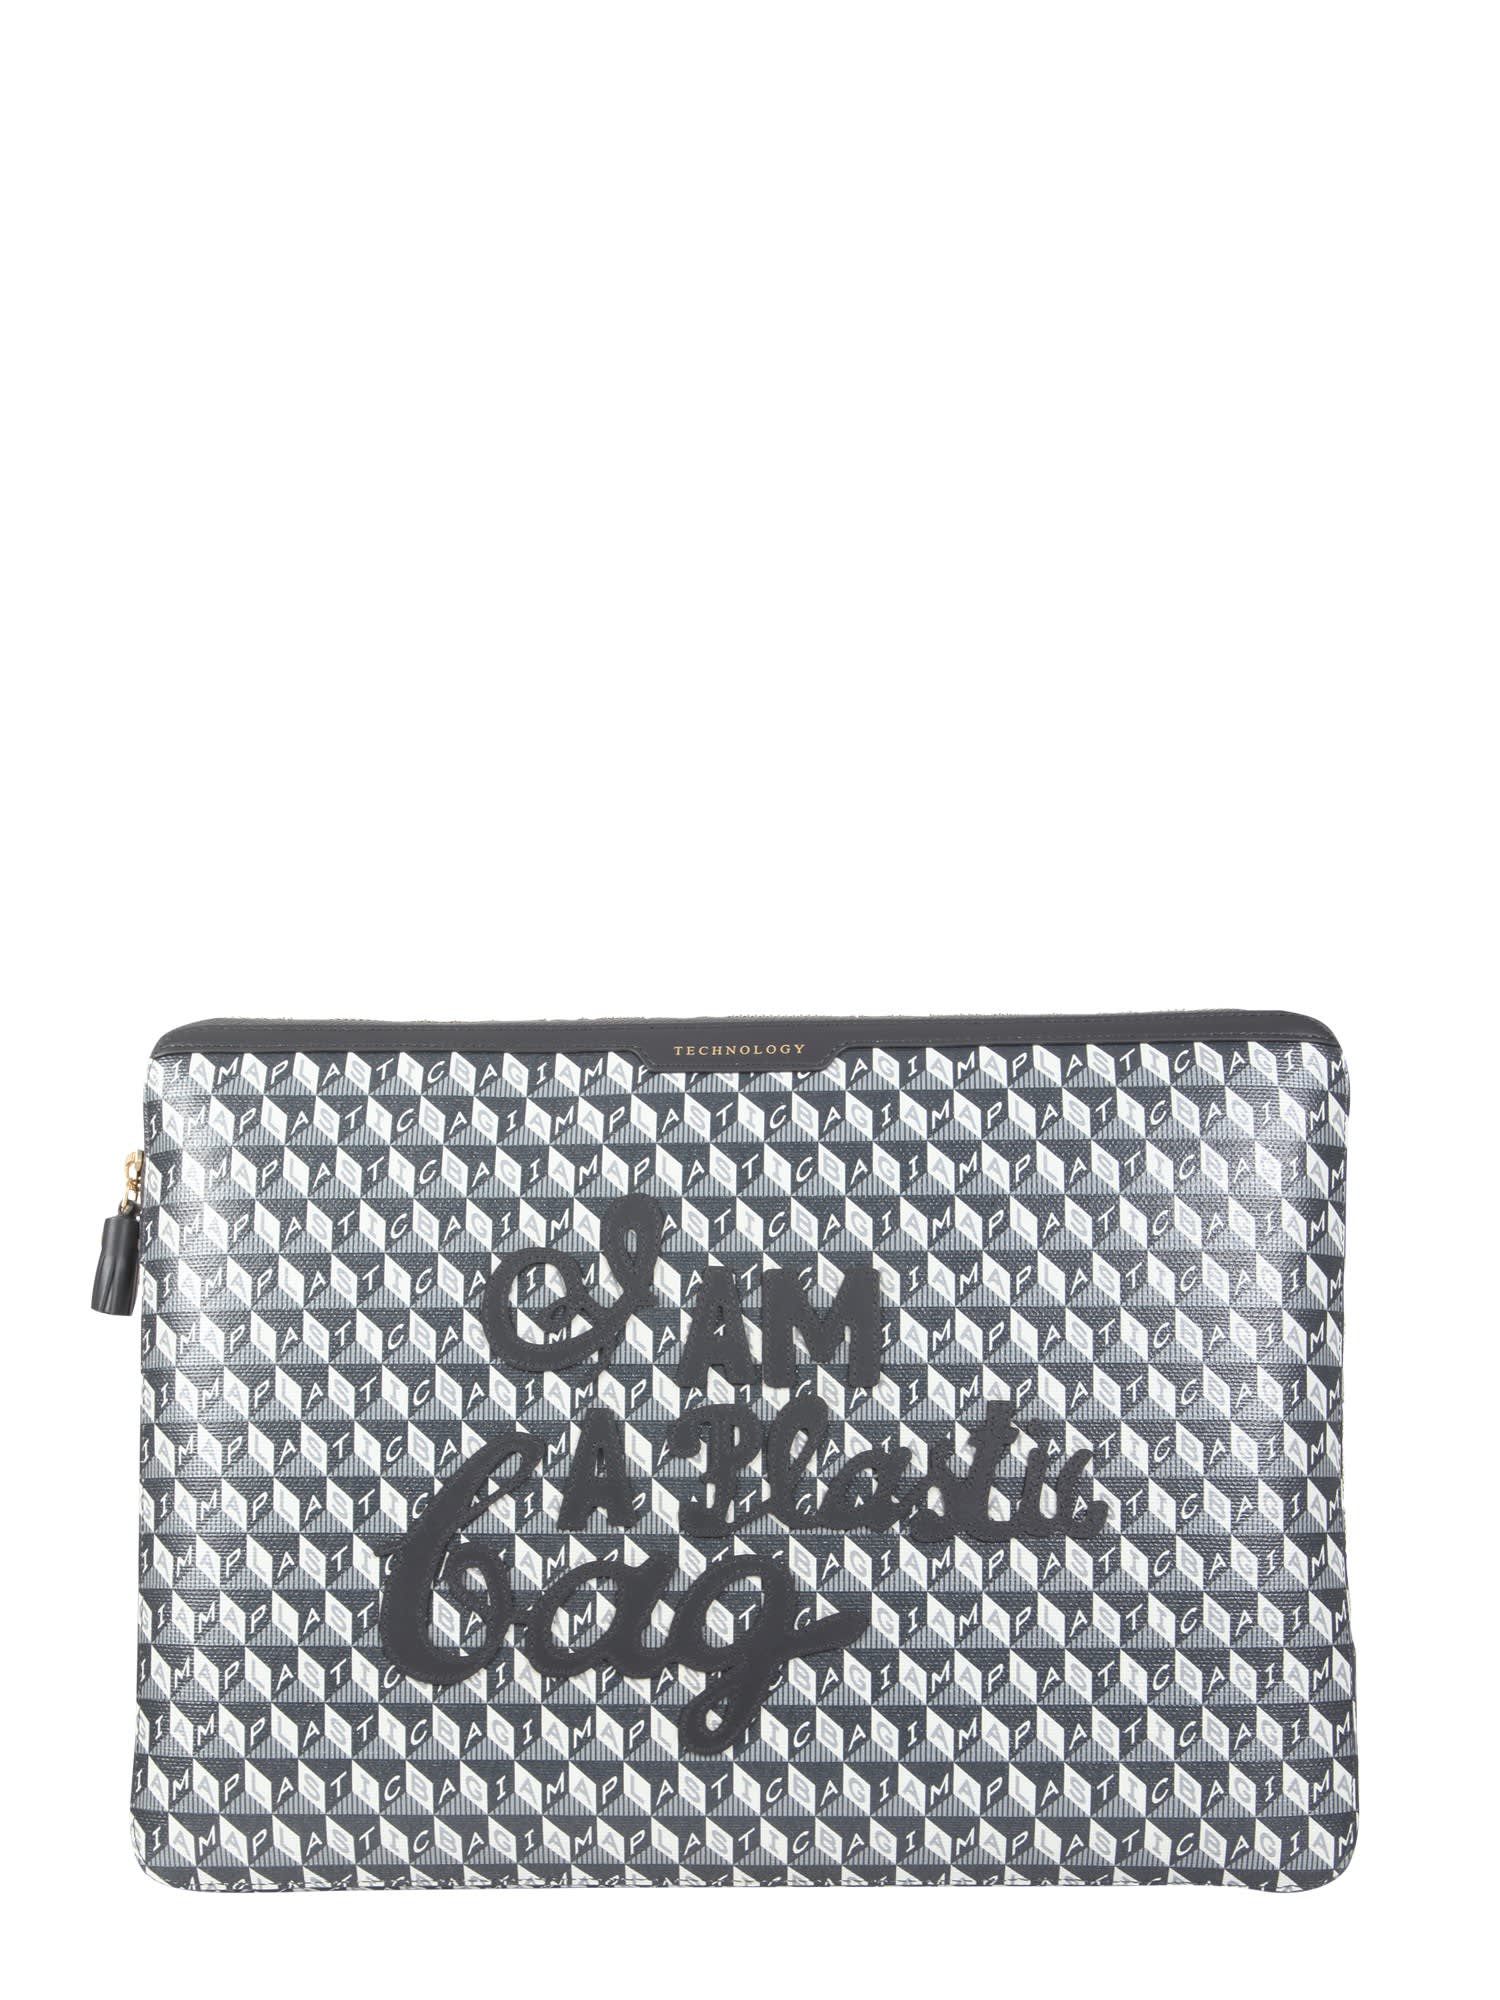 Anya Hindmarch Technology Zip Pouch